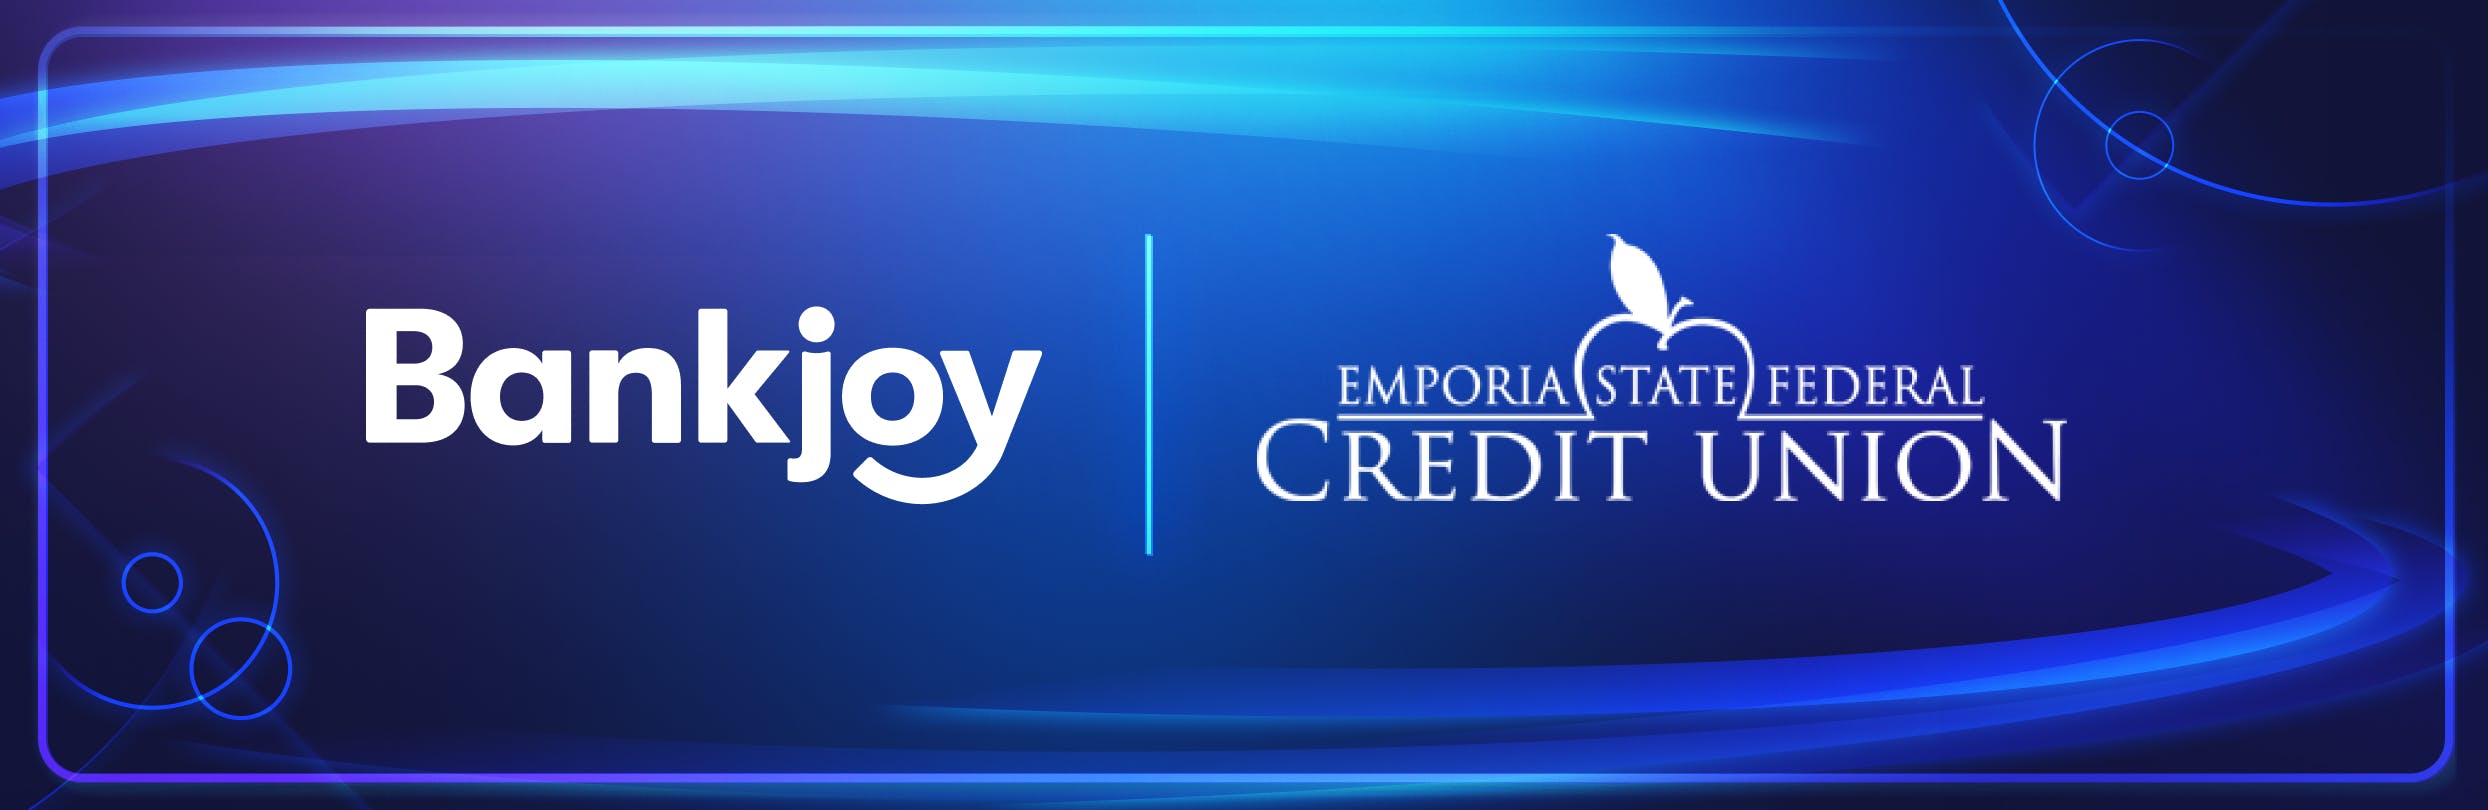 Bankjoy logo and the Emporia State Federal Credit Union logo